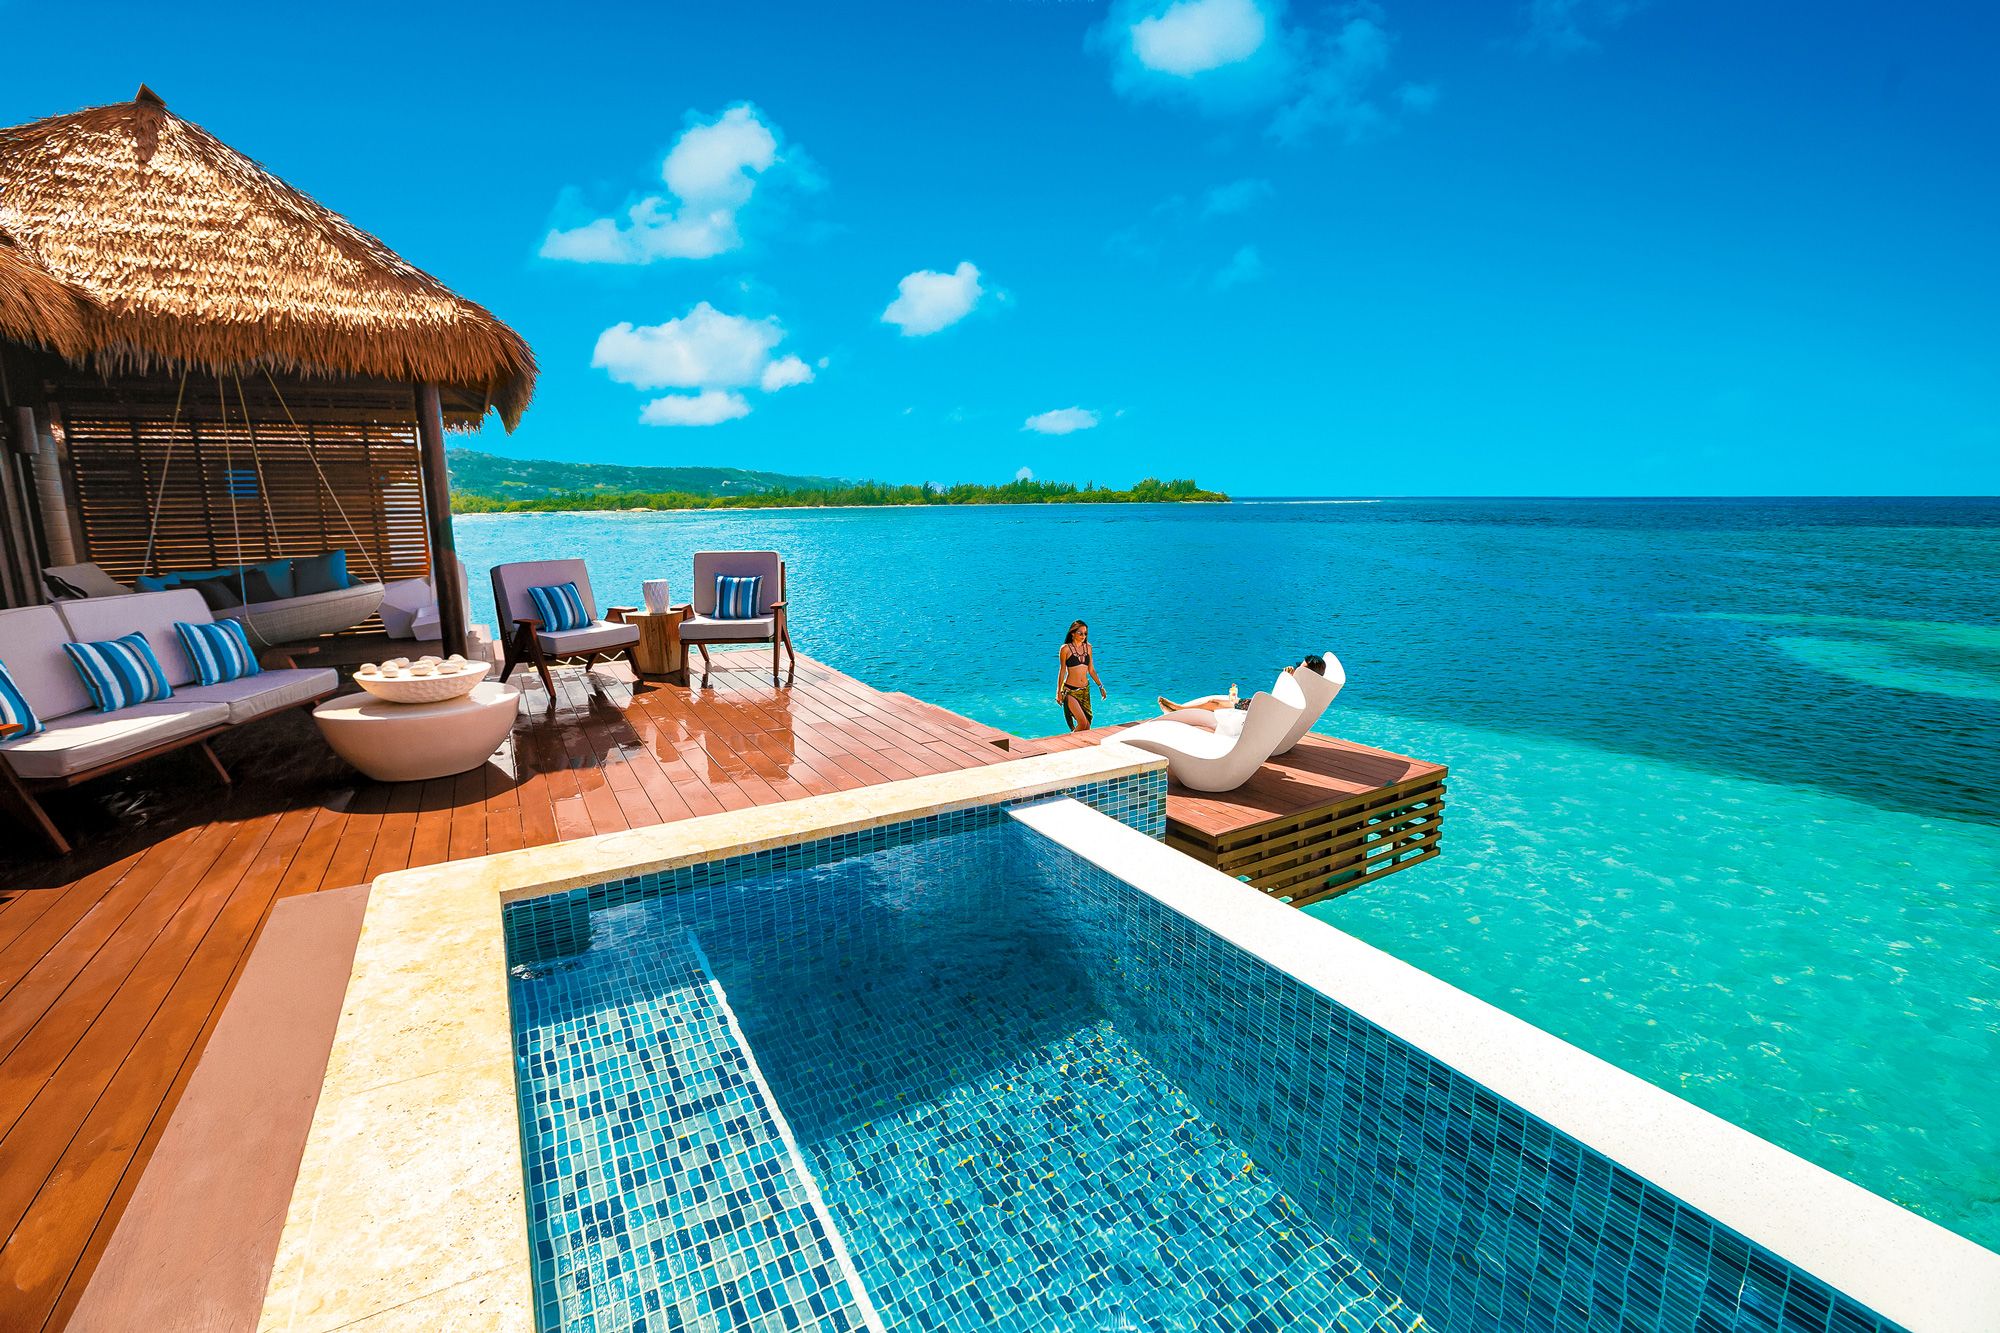 Sandals-Royal-Caribbean-Over-the-Water-Private-Island-Butler-Villa-with-Infinity-Pool-Out